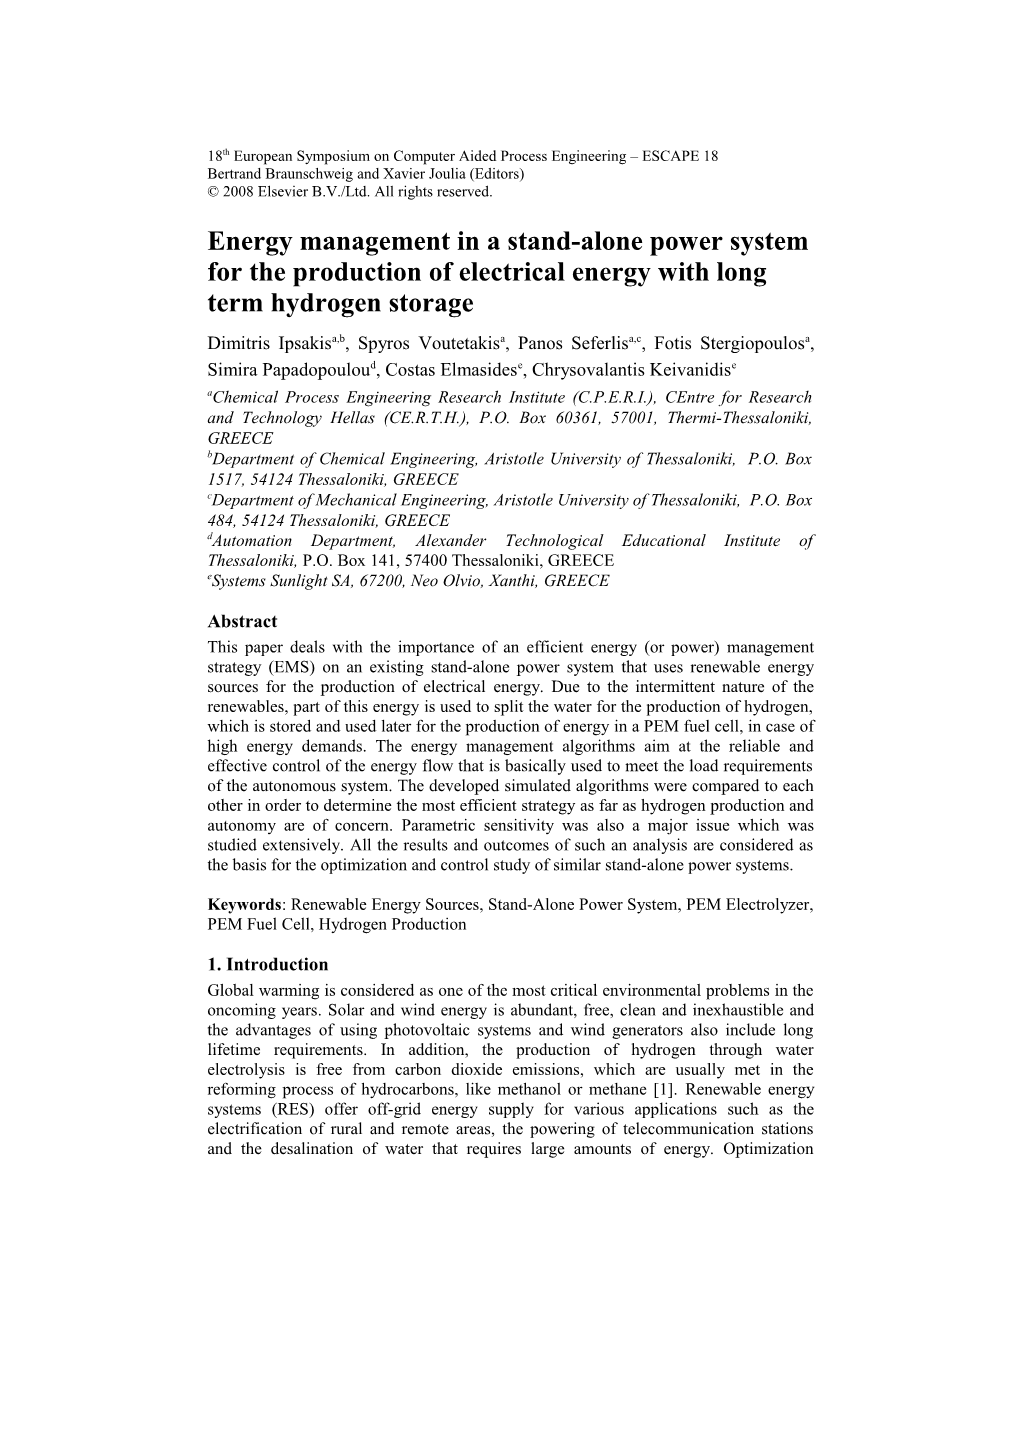 Energy Management in a Stand-Alone Power System for the Production of Electrical Energy